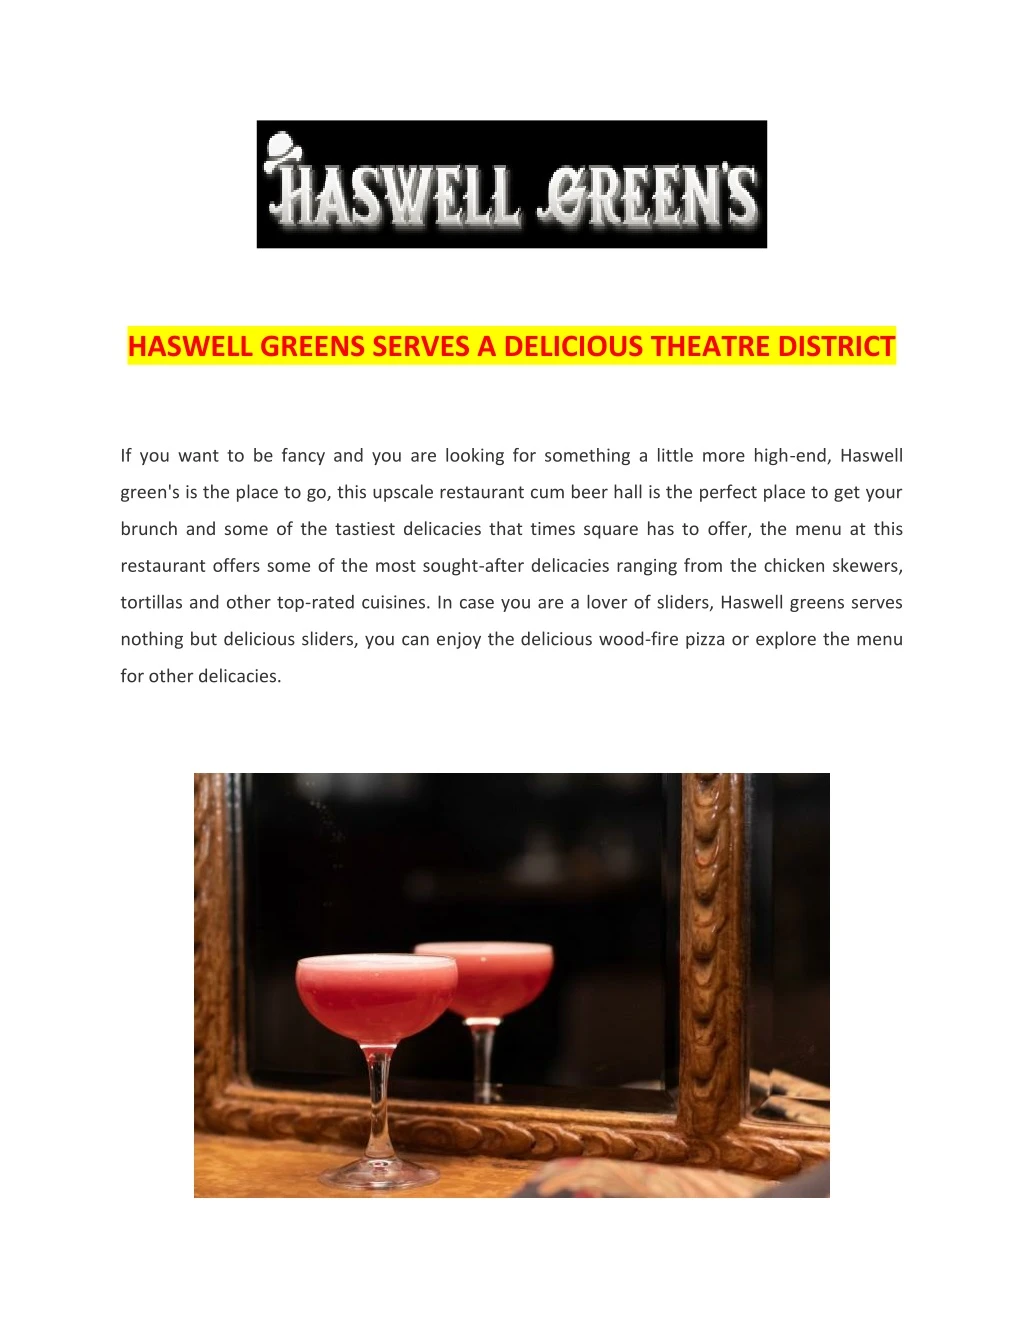 haswell greens serves a delicious theatre district